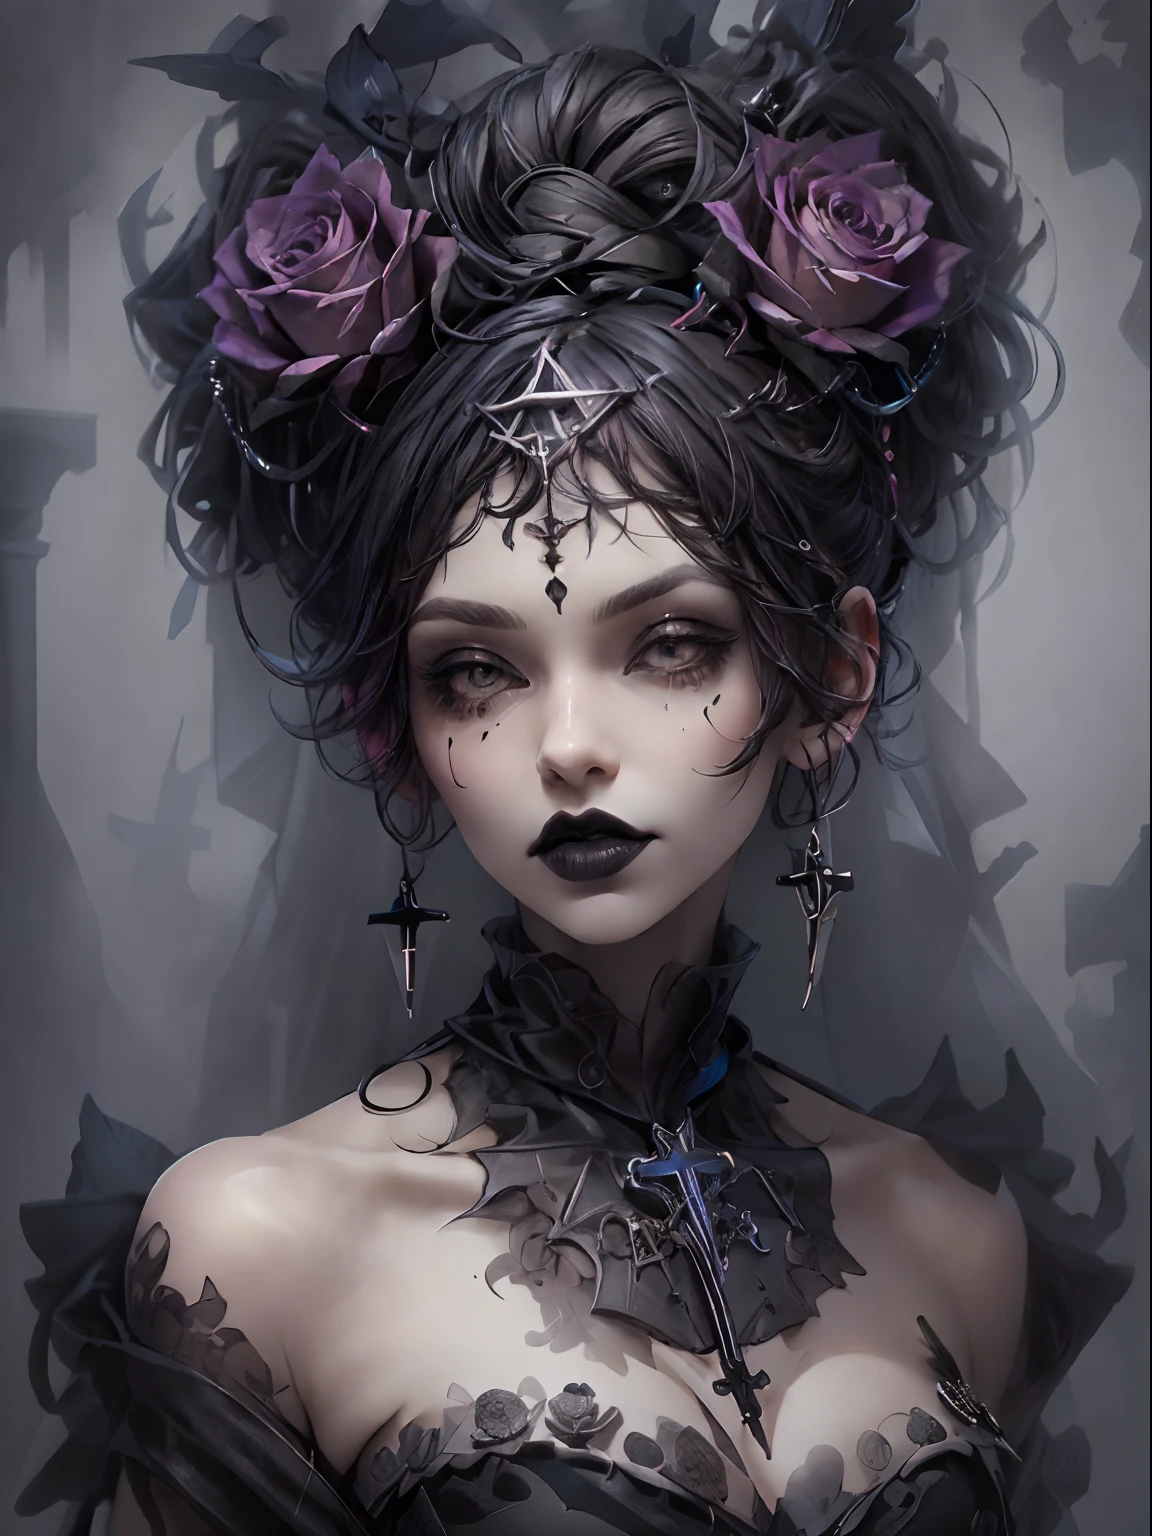 HighestQuali，tmasterpiece：1.2，Detailed details，1 Gothic girl，Black victorian dress，Gorgeous headdress，Bust，Rose flower，crosses，silver ornaments 、redheadwear、colorful hair with victorian updo hairstyle 、paleskin、Black lipstick and eye shadow，Accessories include the Cross Medal，Pentagram，crosses，cloaks，shawl，Sexy，chies，a lit candle, full body image